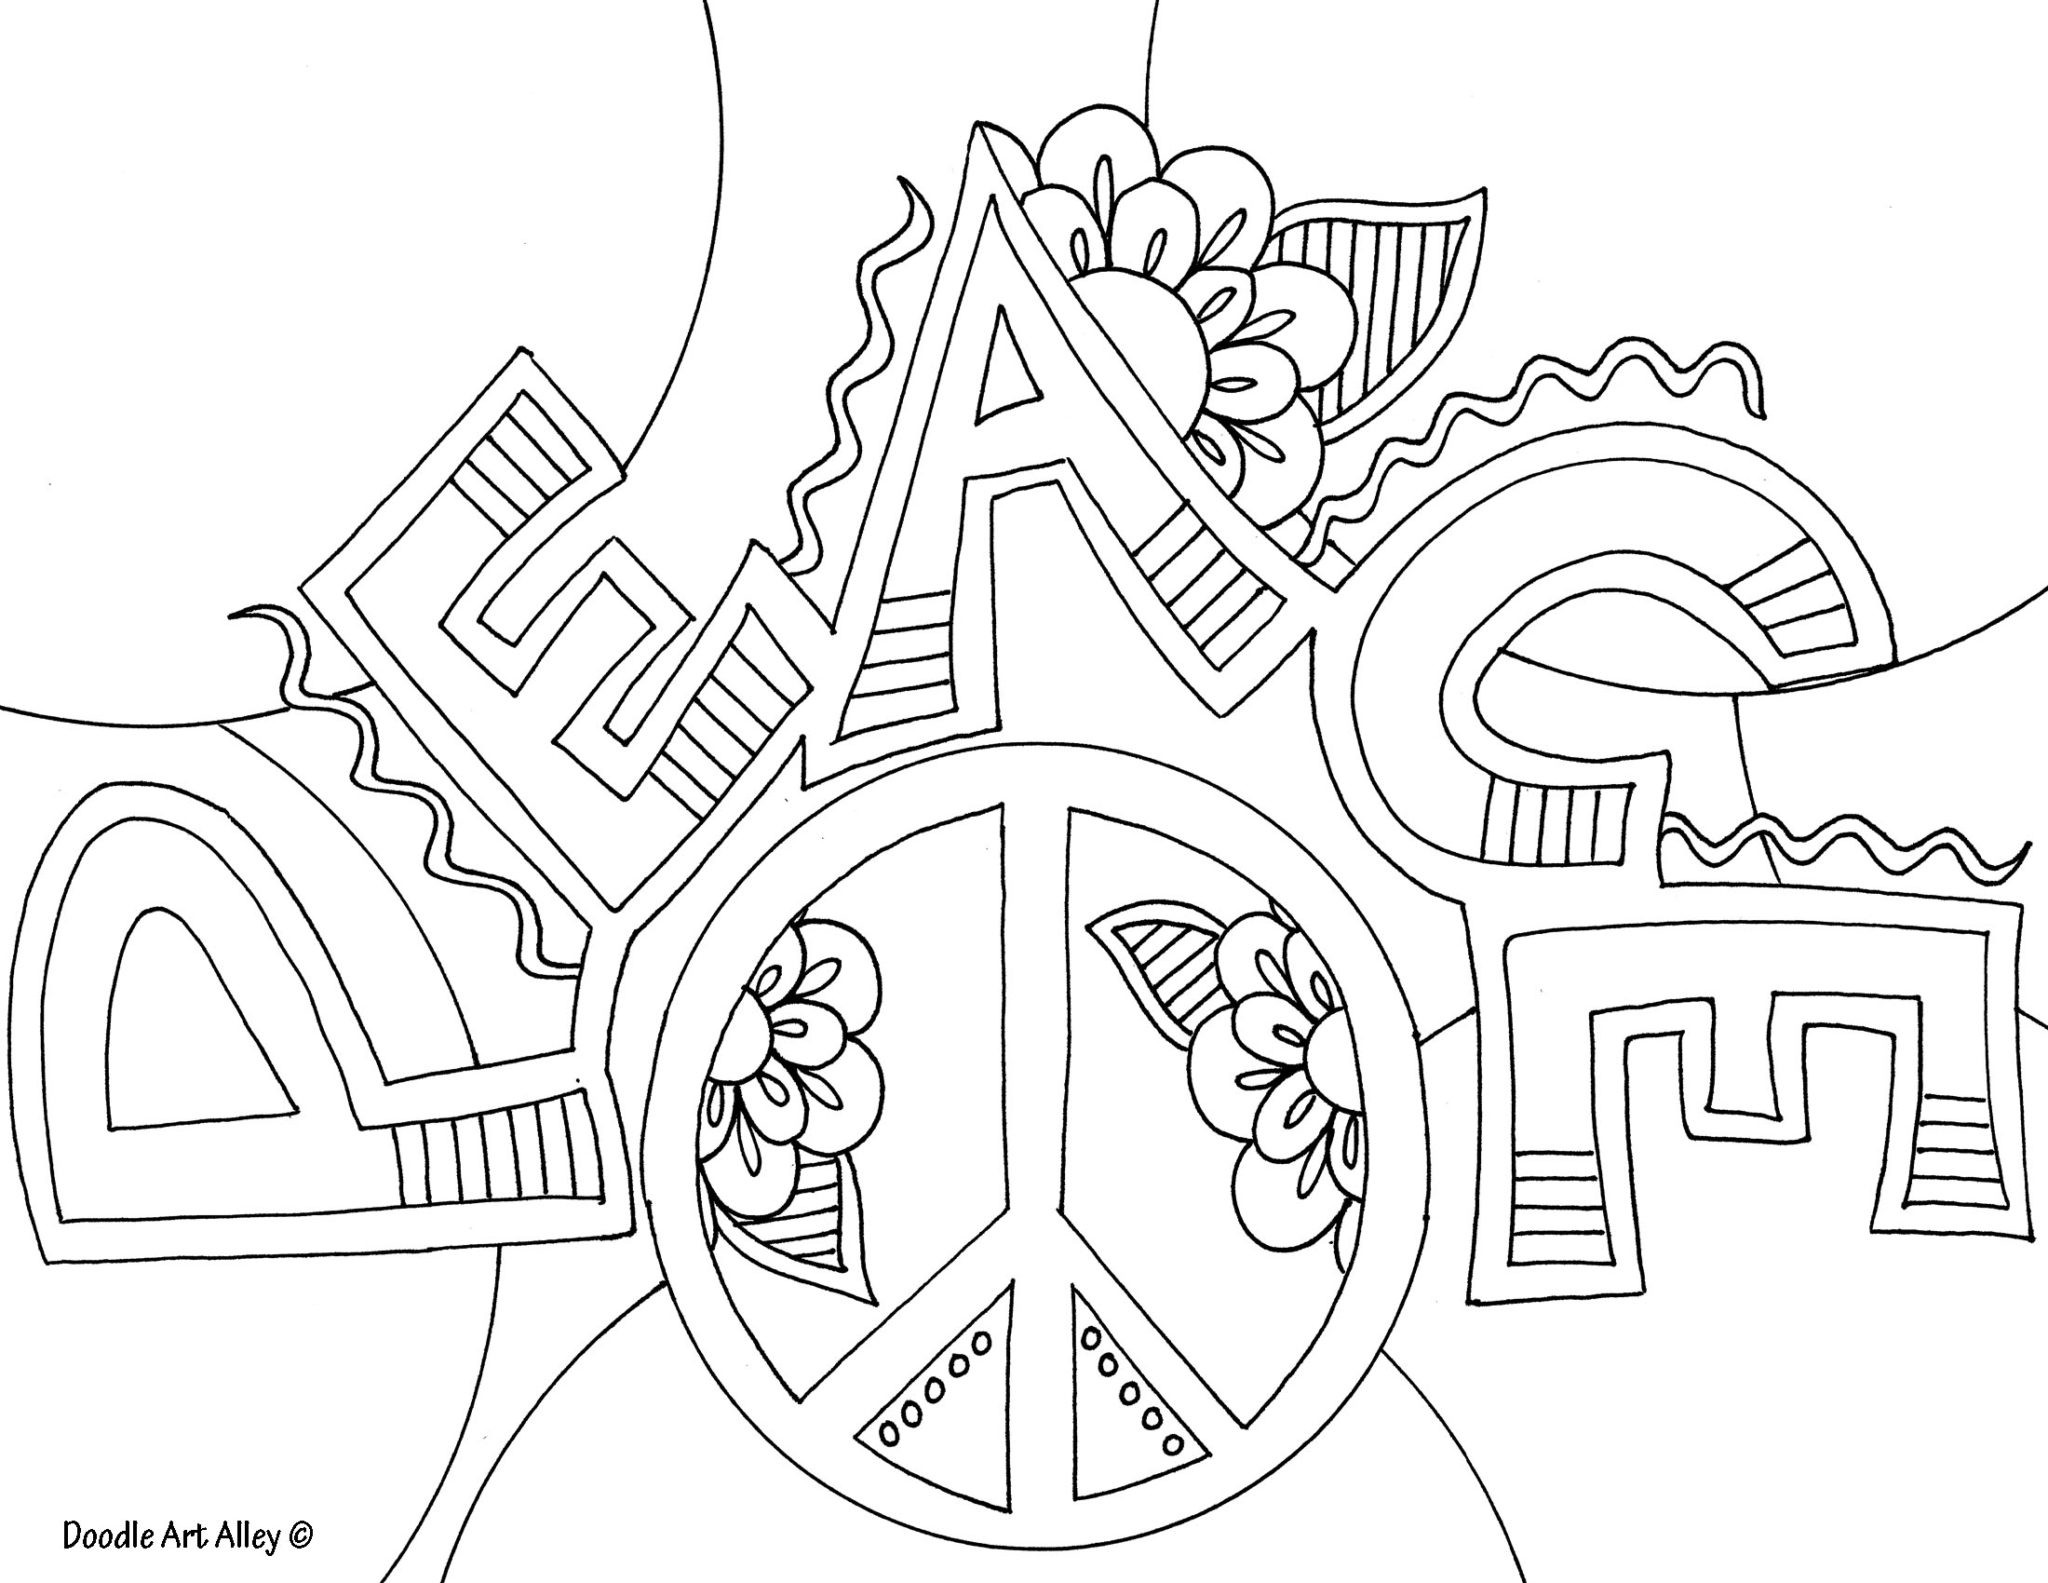 Printable Coloring Pages For Teens No Words
 be inspired Wet Winter Afternoon – colouring in with the